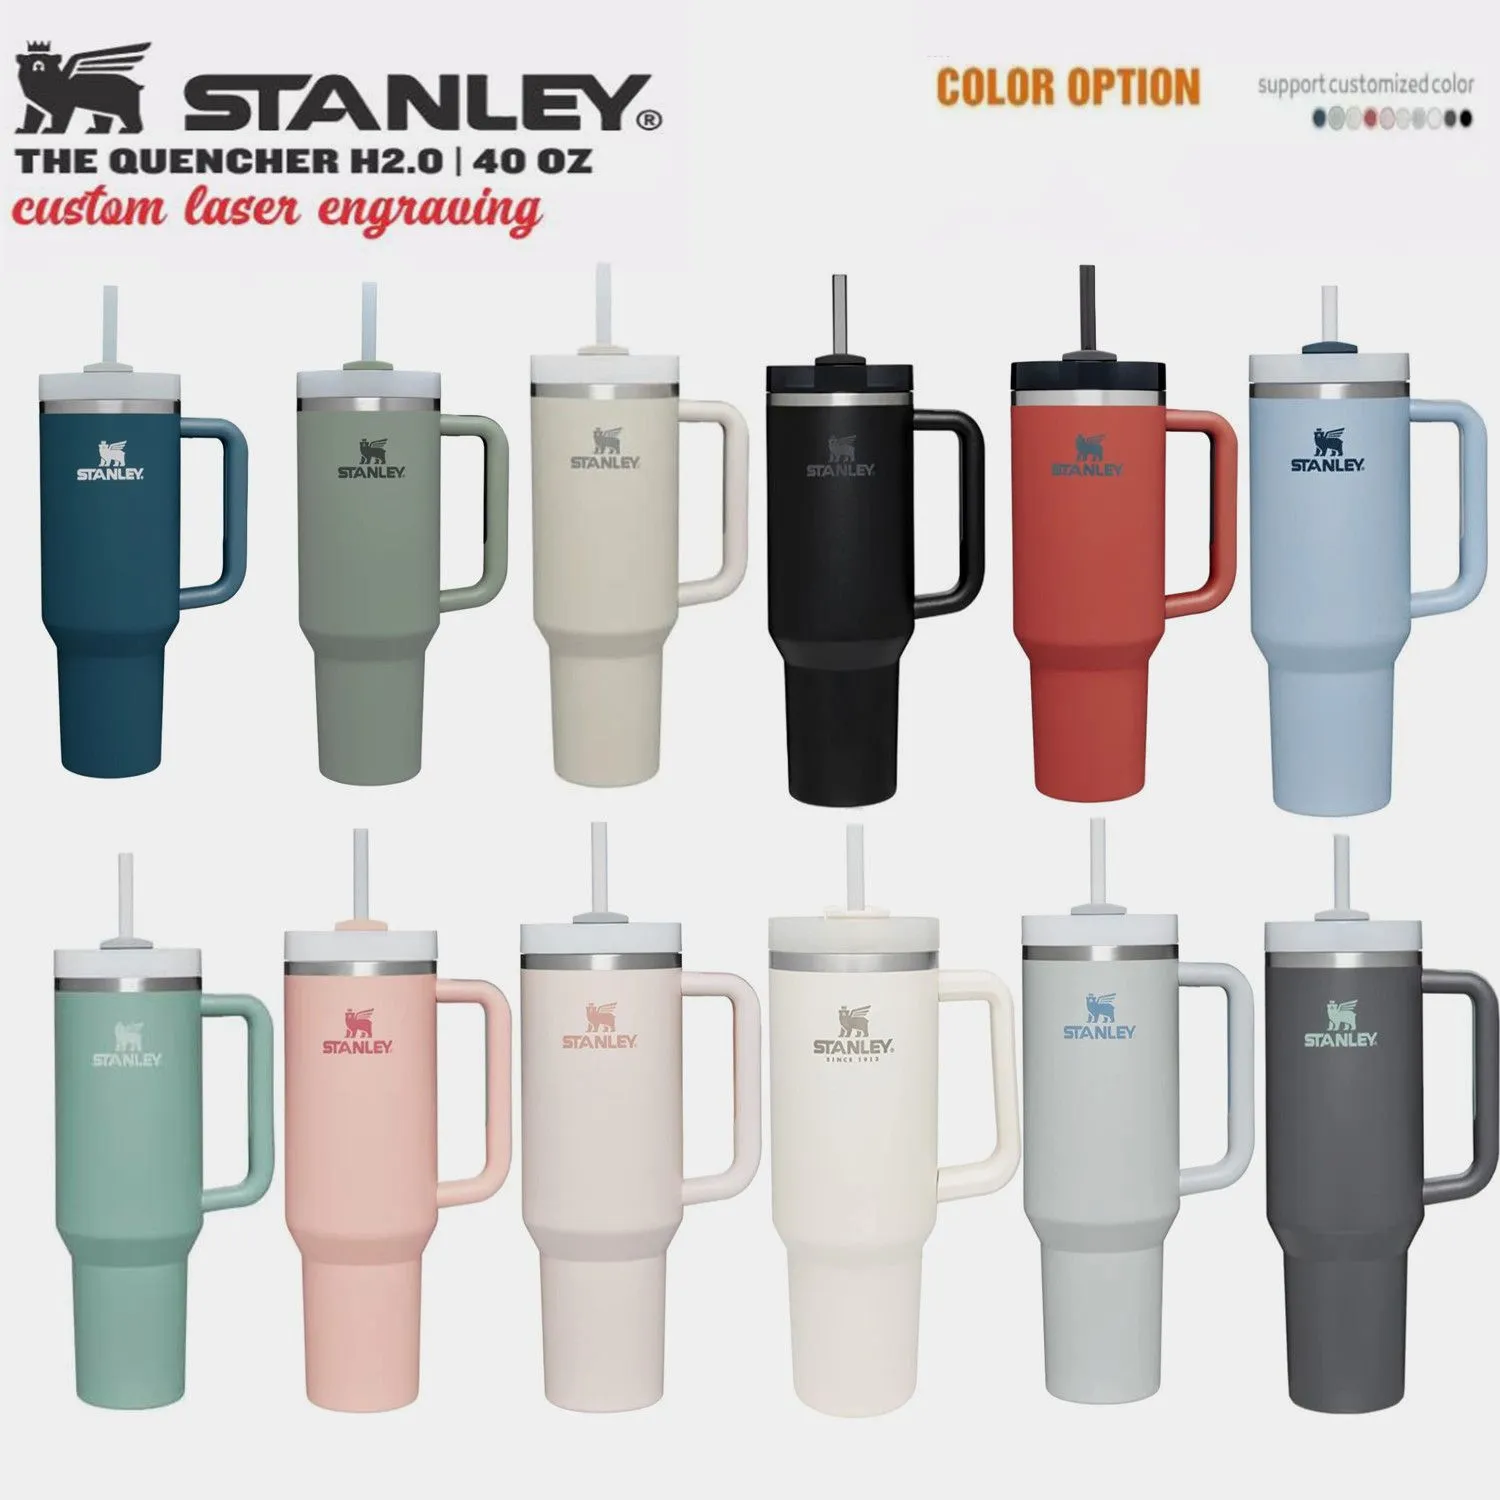 

1pc New STANLEY Quencher H2.0 40oz Stainless Steel Tumblers Cups With Silicone Handle Lid and Straw 2nd Generation Car Mugs Vacuum Insulated Water Bottles 0414, Multi-color